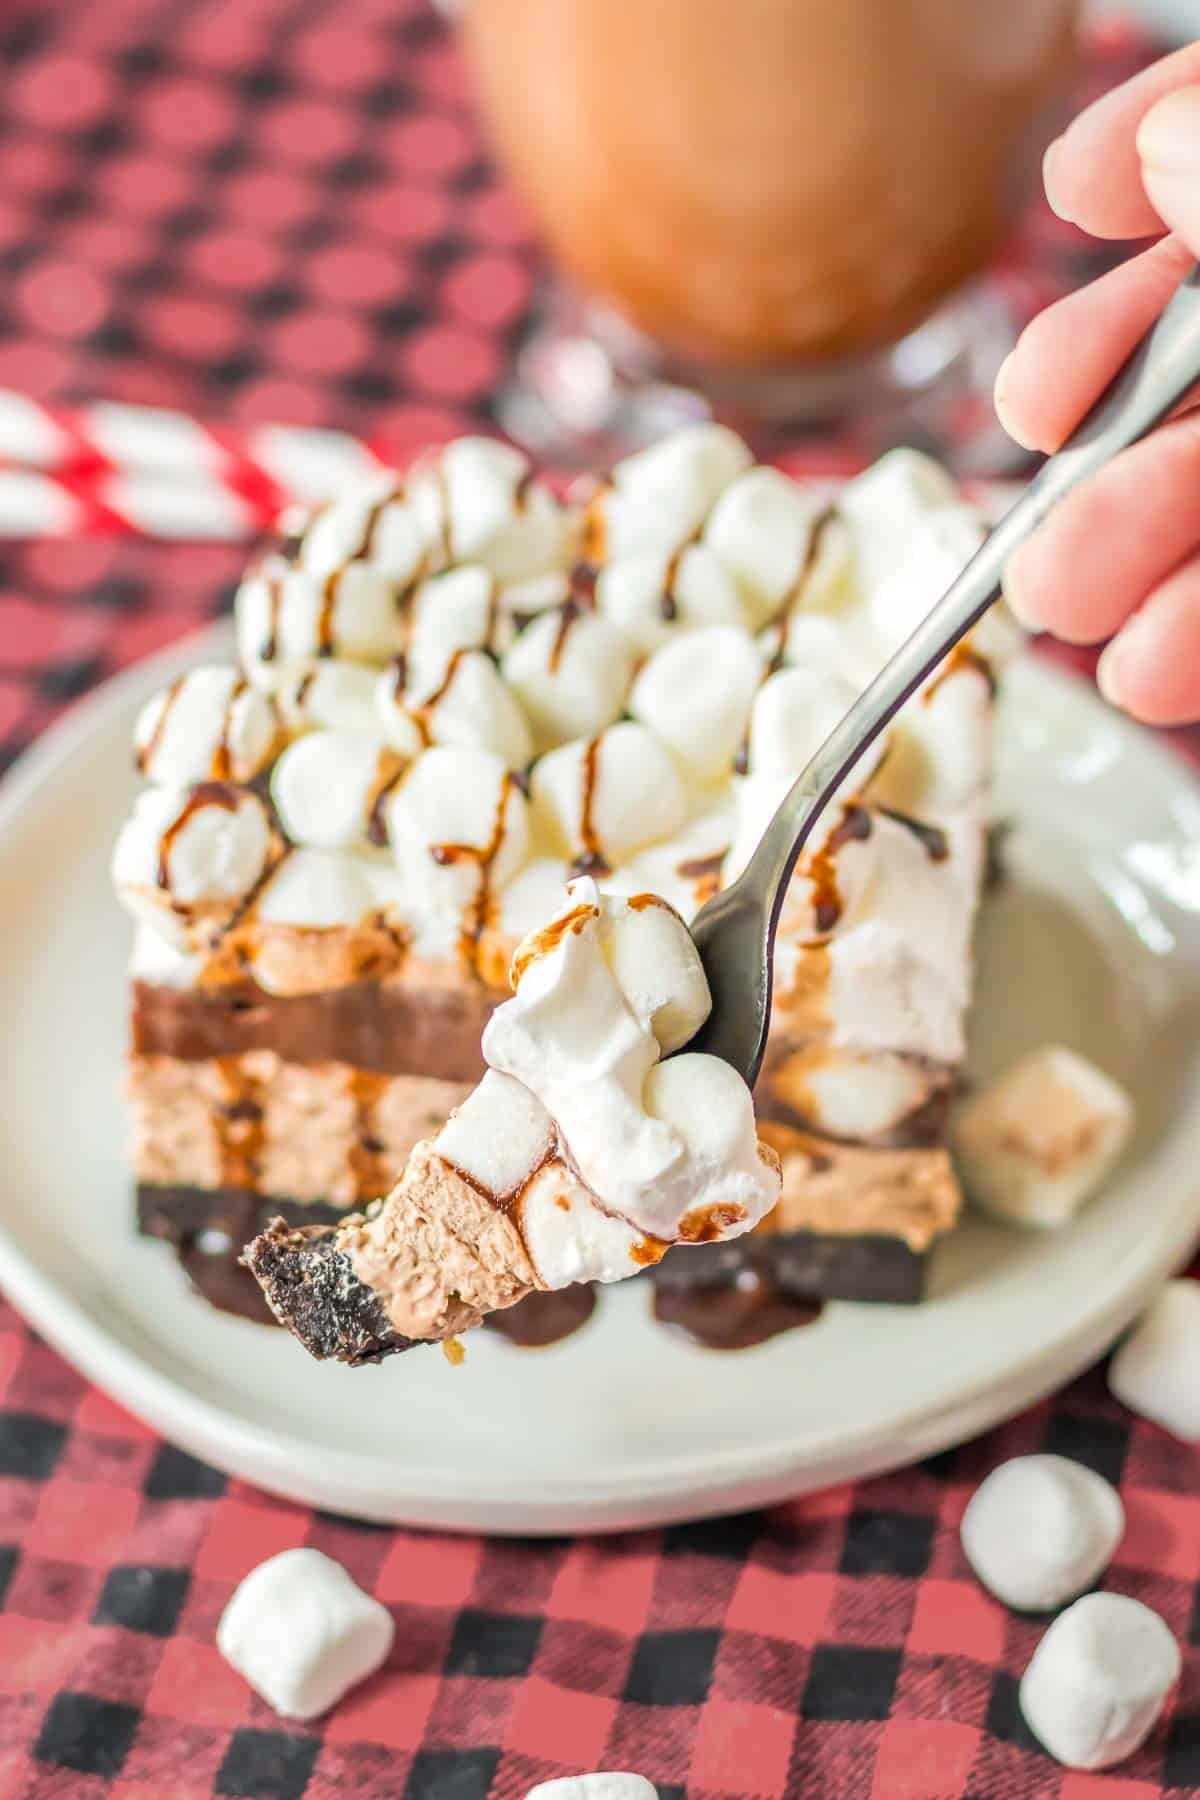 A person holding a fork with a bite of chocolate oreo delight dessert with mini marshmallows.